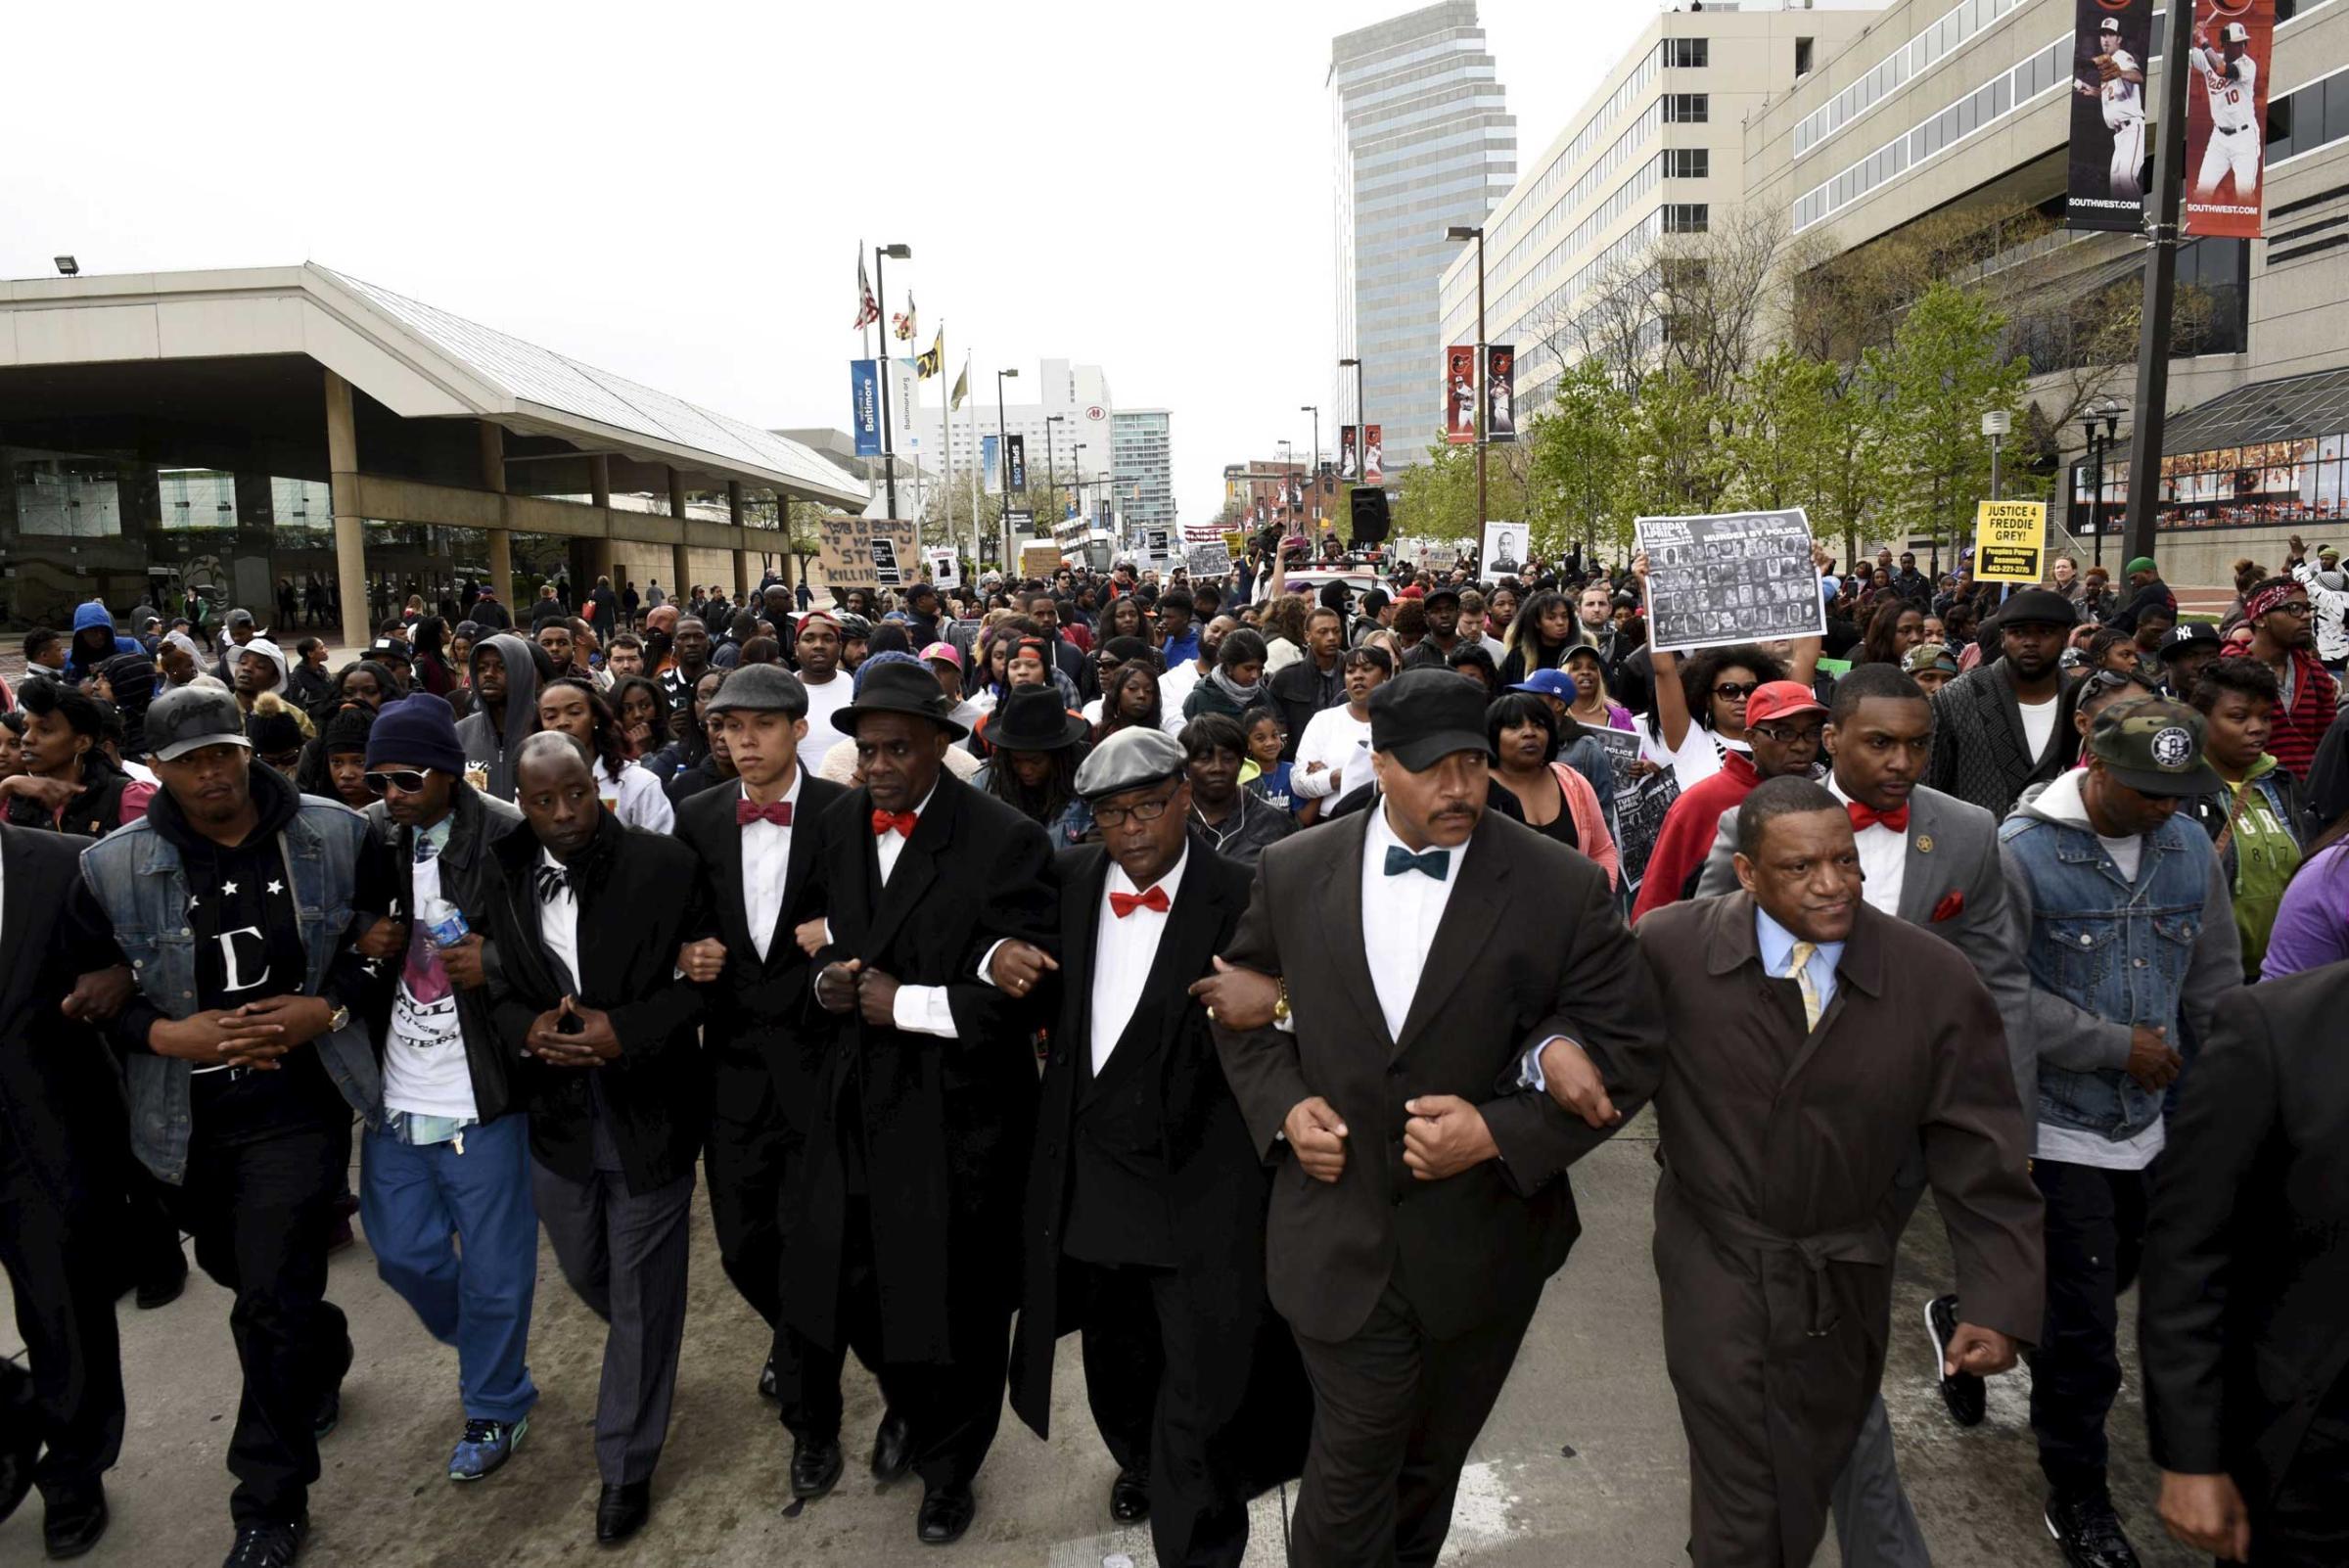 Demonstrators march to City Hall to protest against the death of Freddie Gray in police custody, in Baltimore on April 25, 2015.